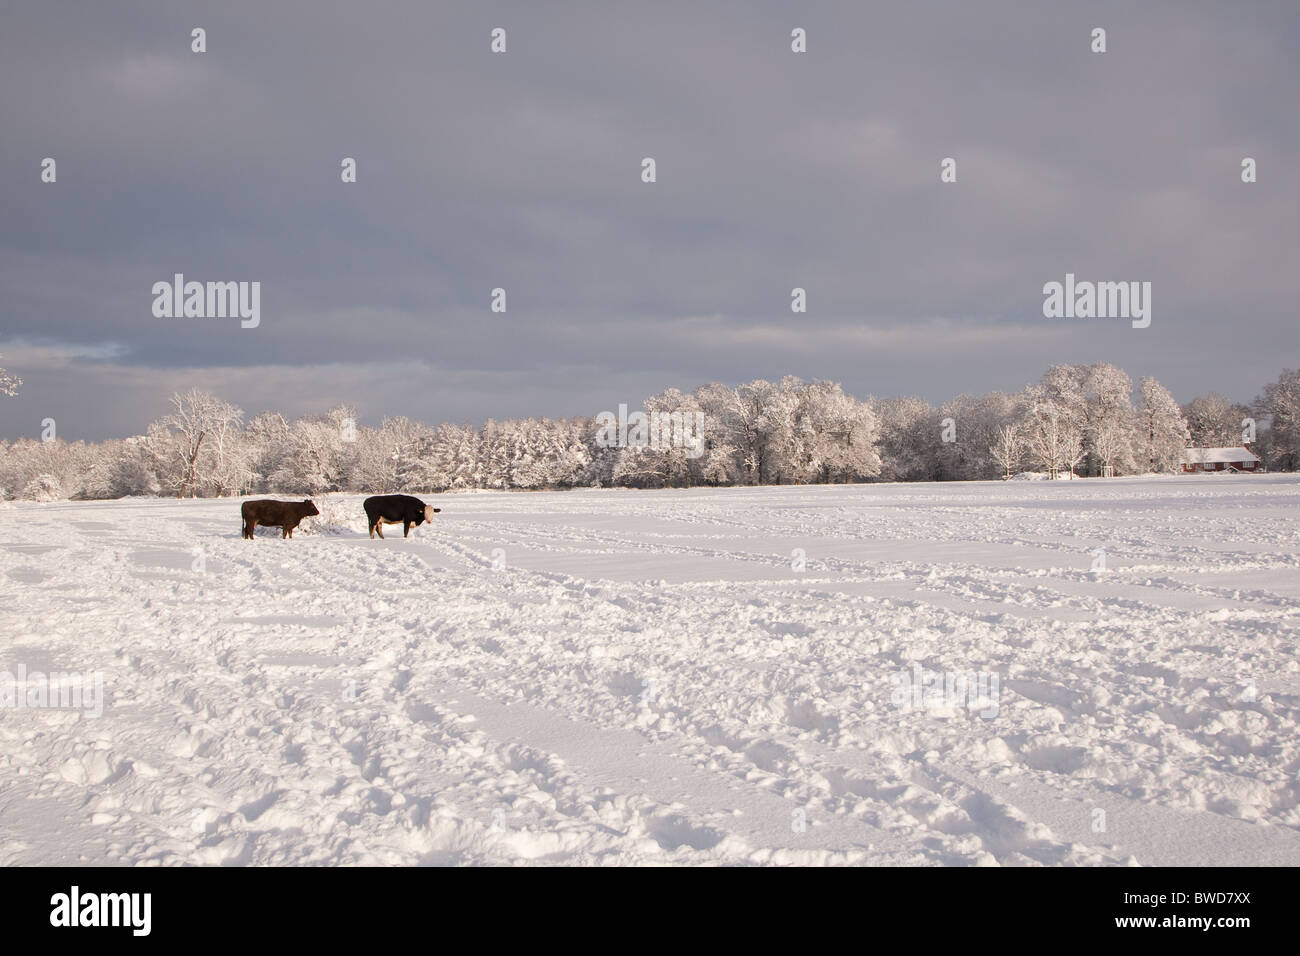 Snowy wintry scene at Denne Park on the edge of Horsham in West Sussex Stock Photo